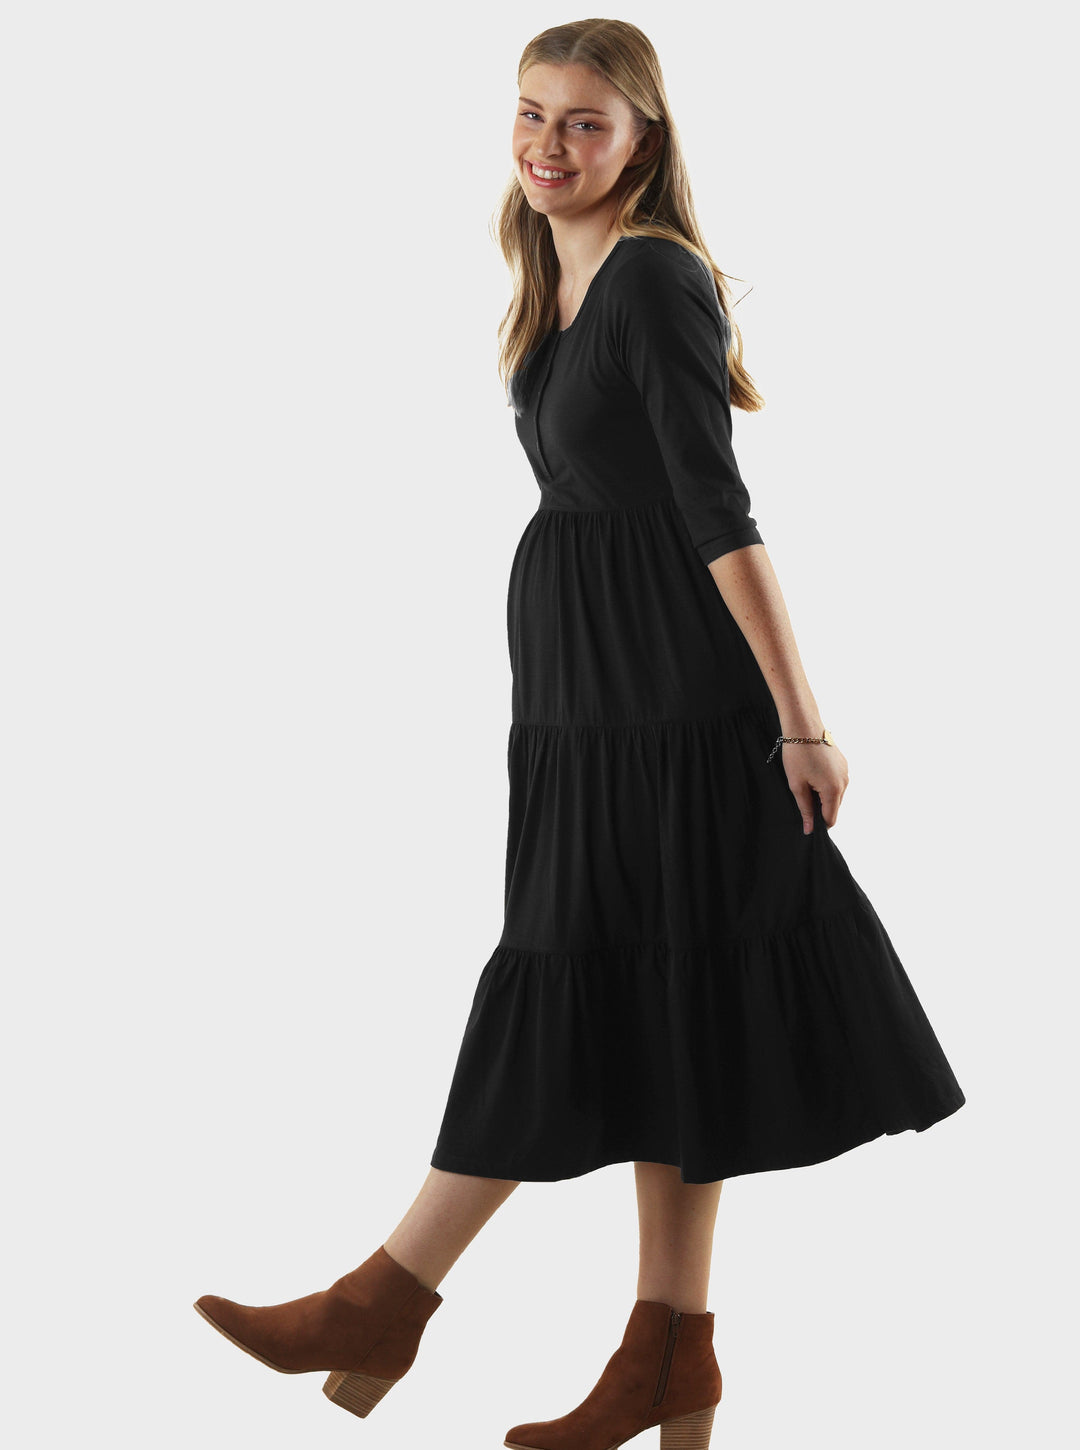 Angel Maternity 'The Essential' Bamboo Tiered Dress - Black